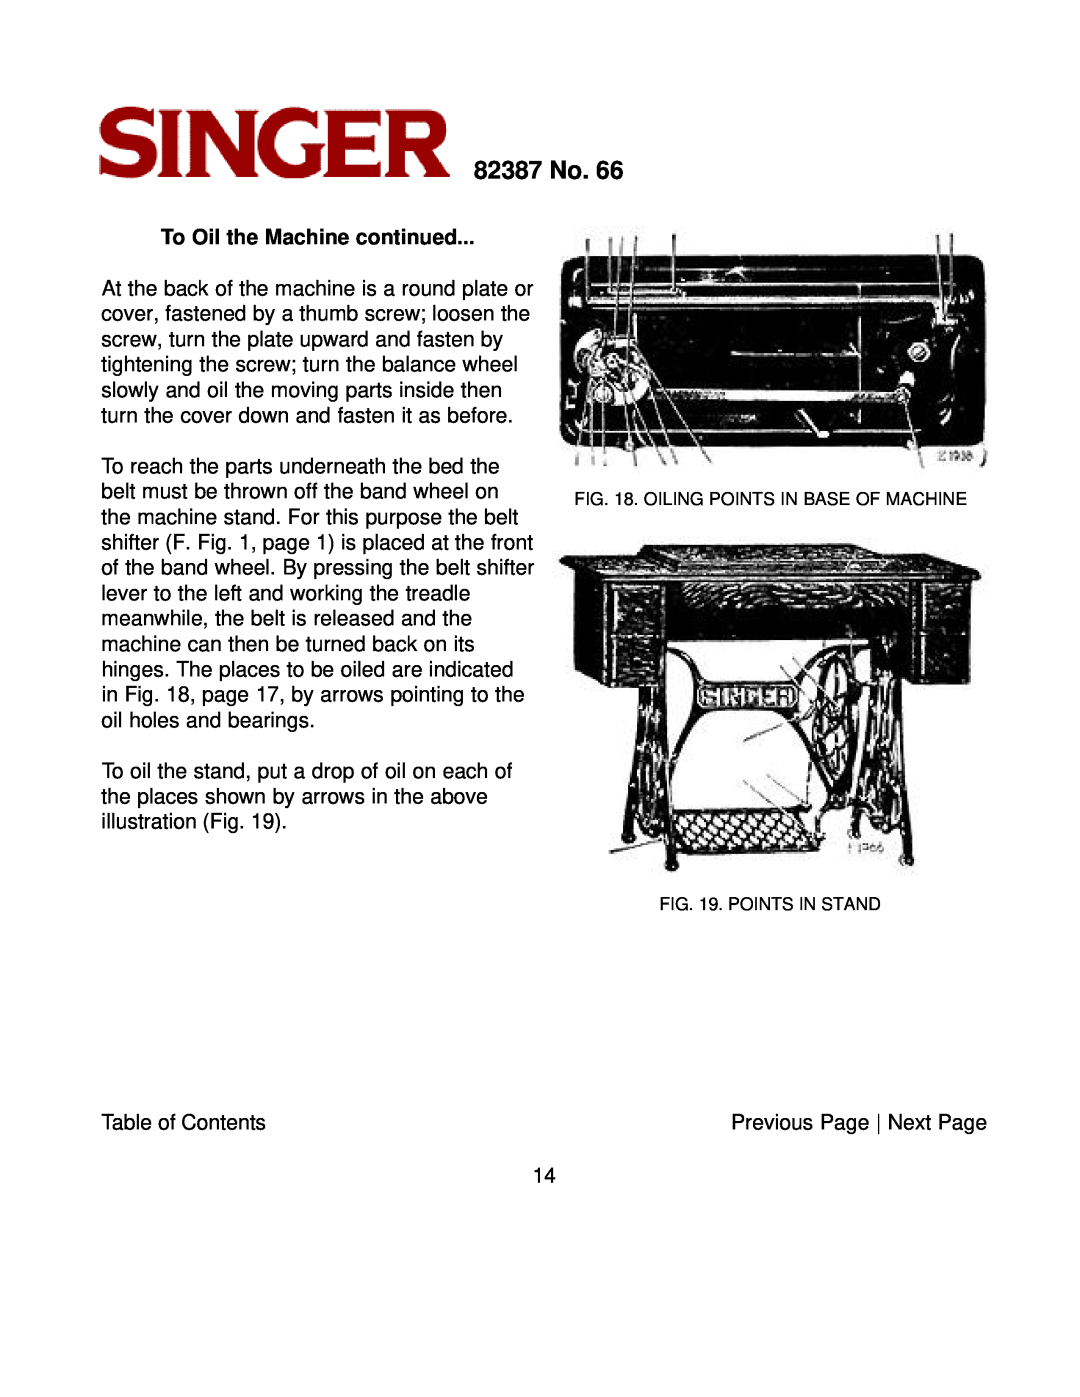 Singer instruction manual To Oil the Machine continued, 82387 No, Points In Stand 